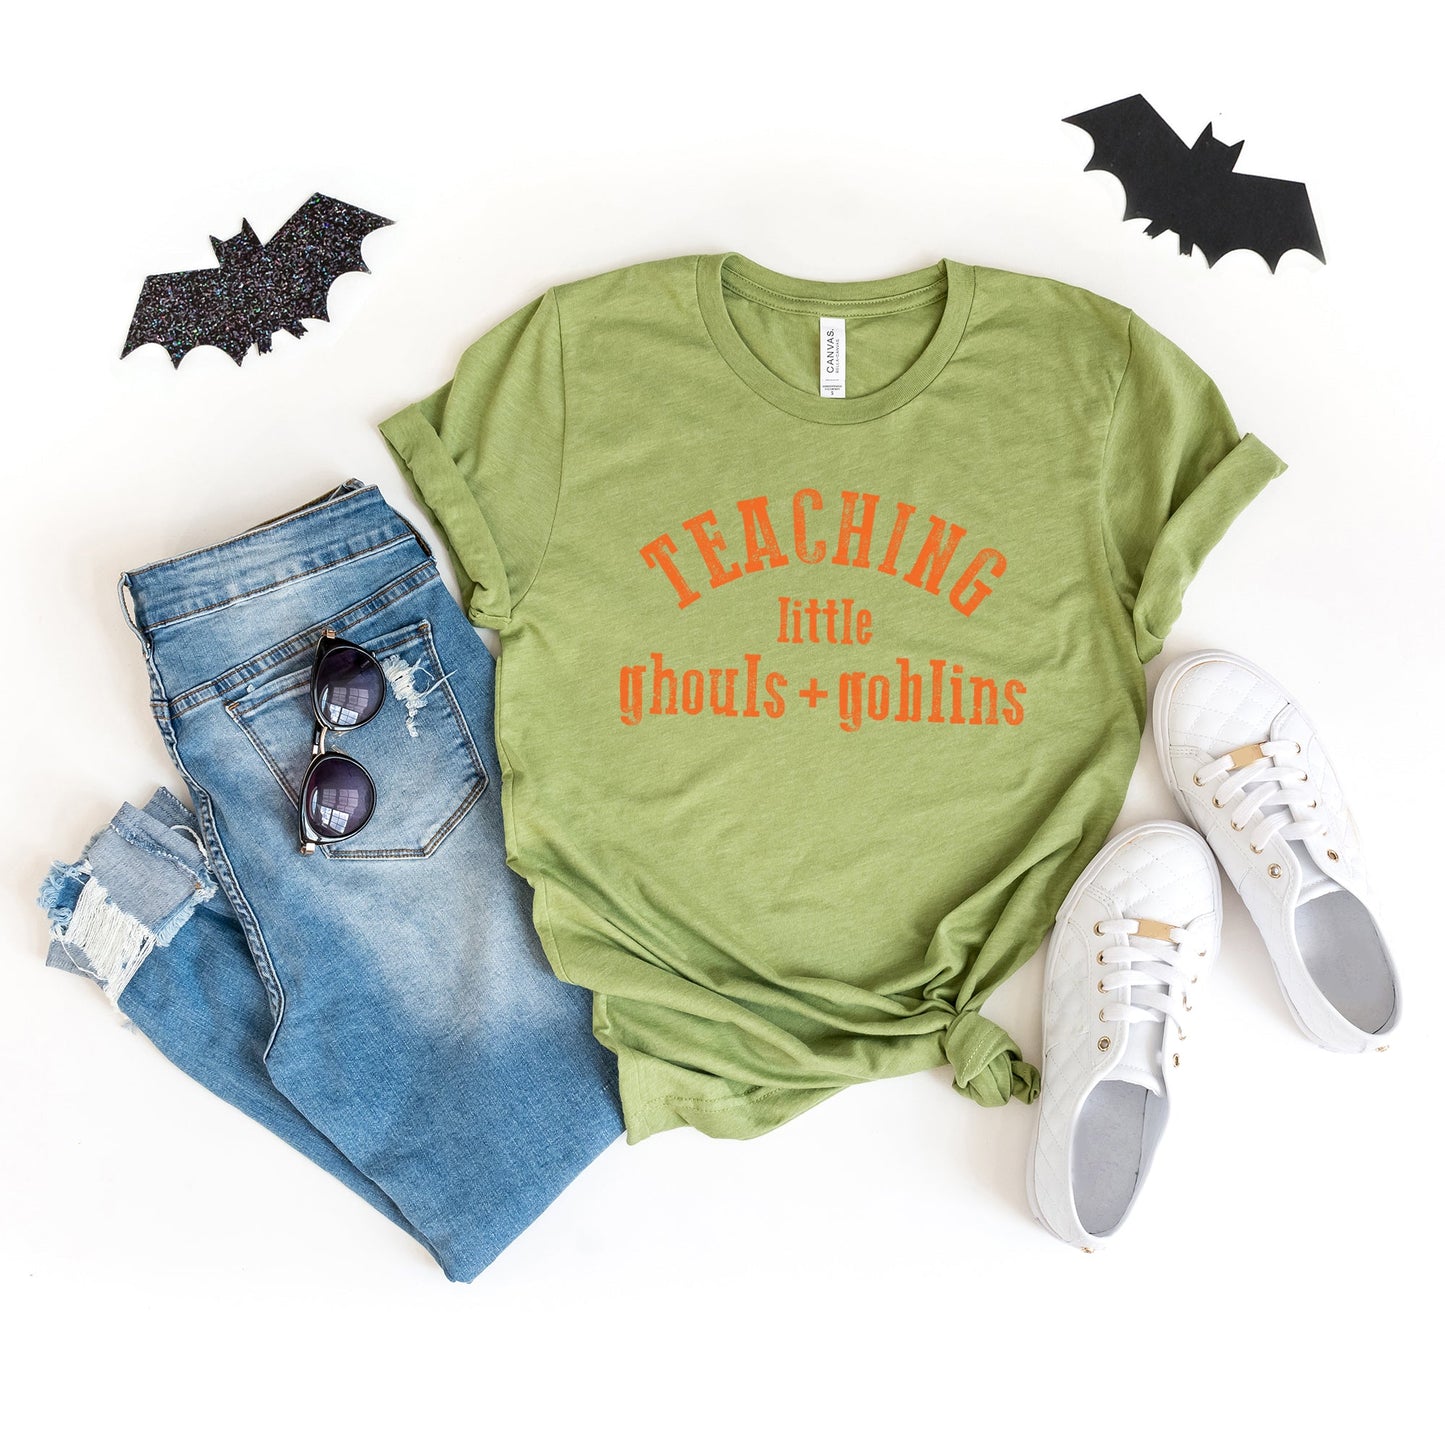 Clearance Teaching Little Ghouls and Goblins | Short Sleeve Graphic Tee